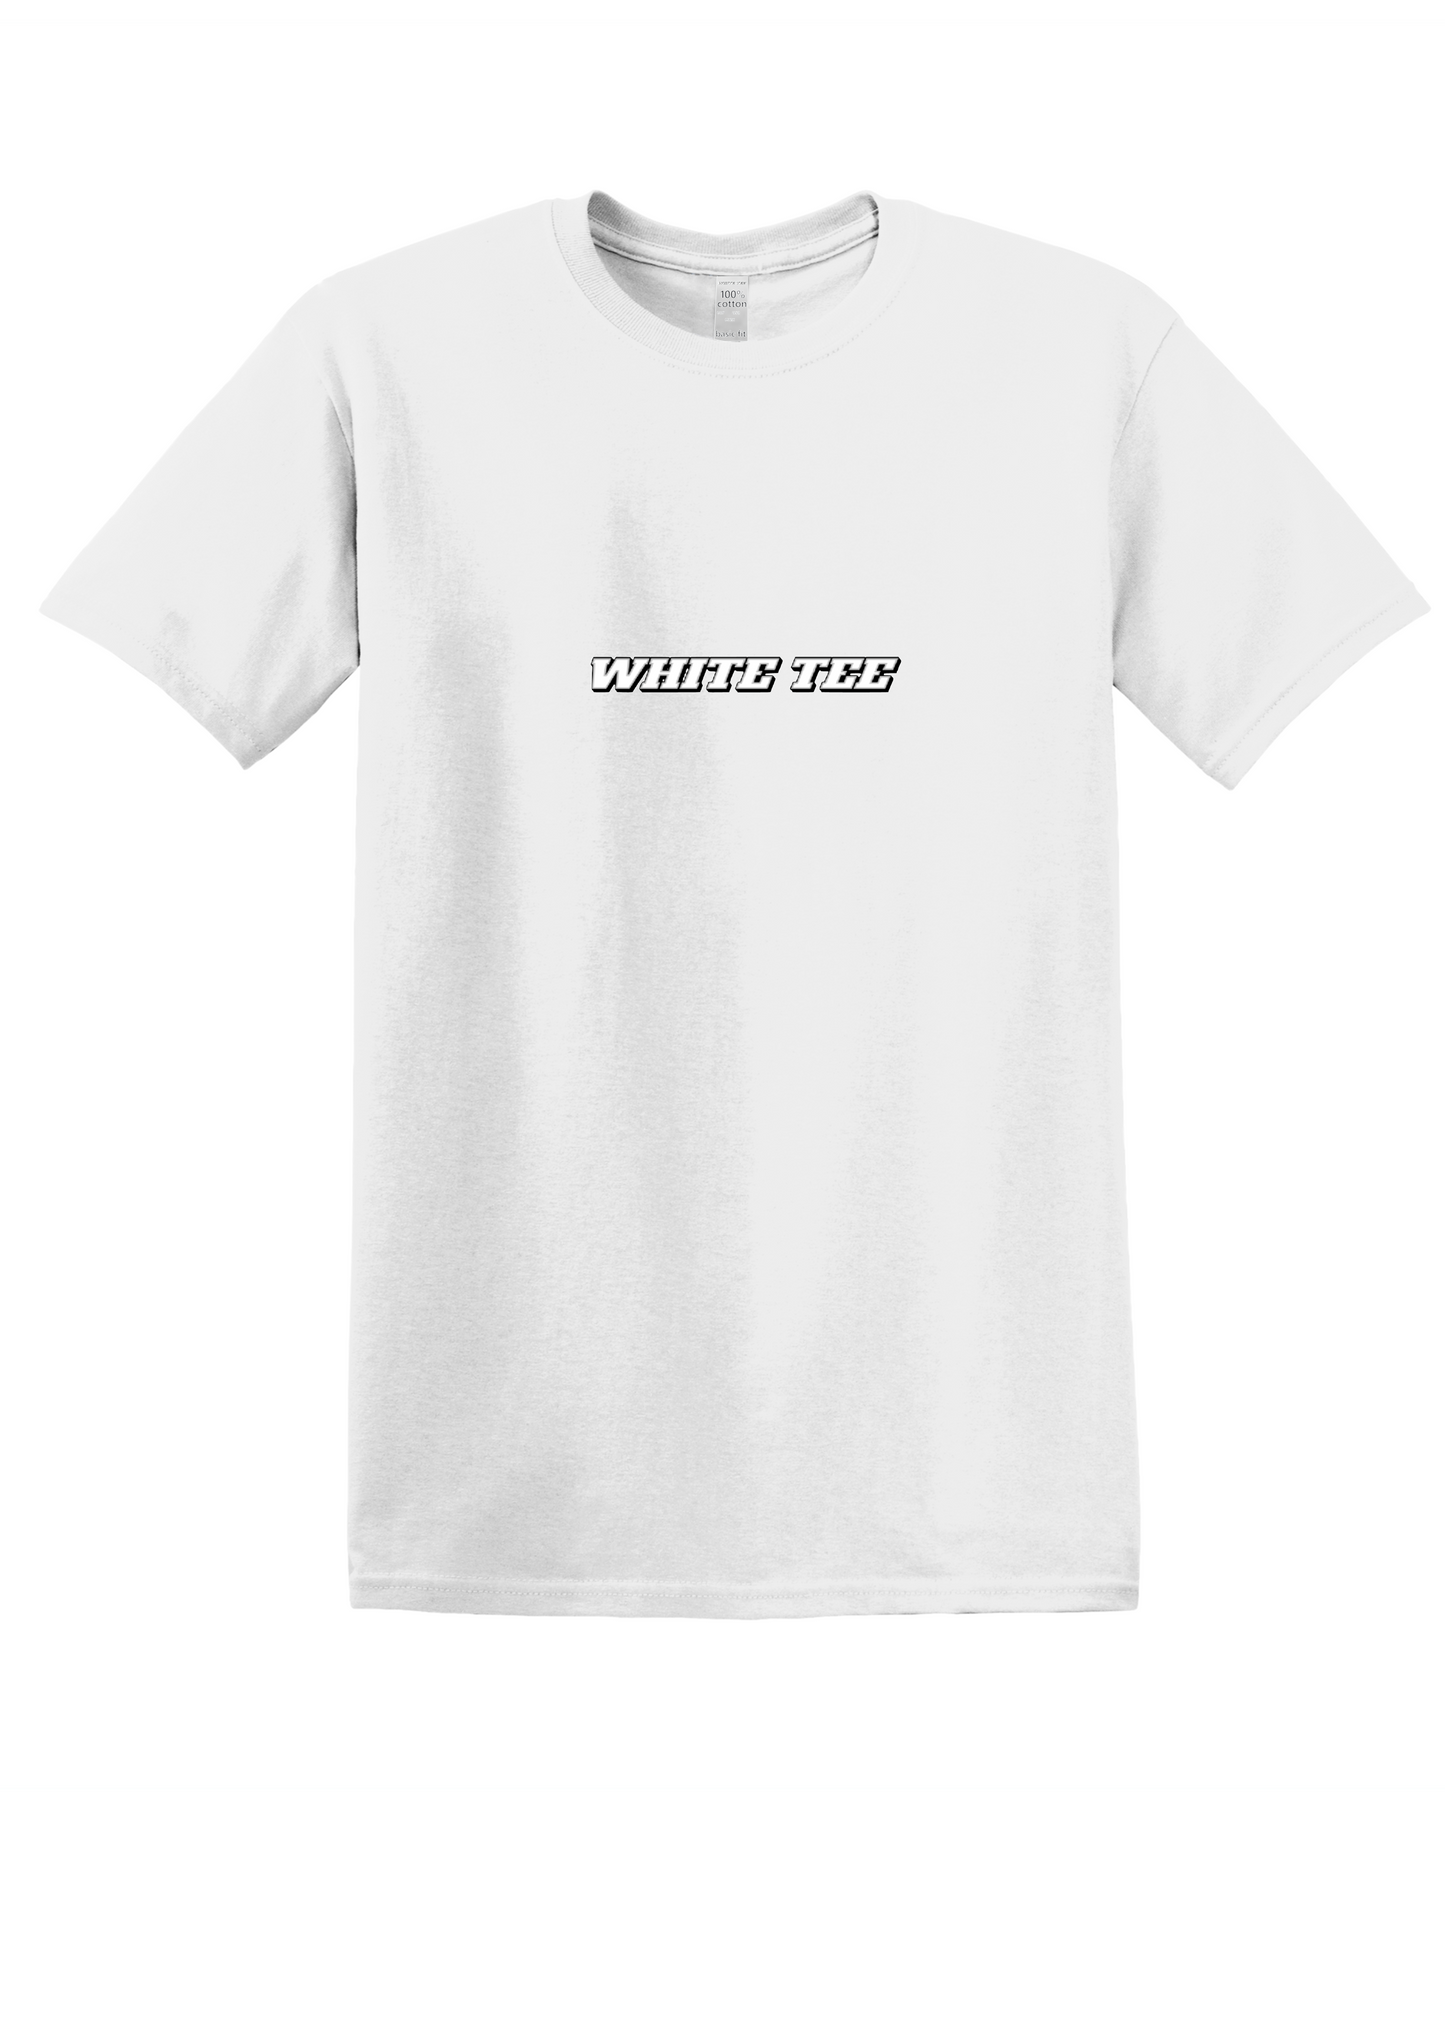 "White Tee" lets fall in love!